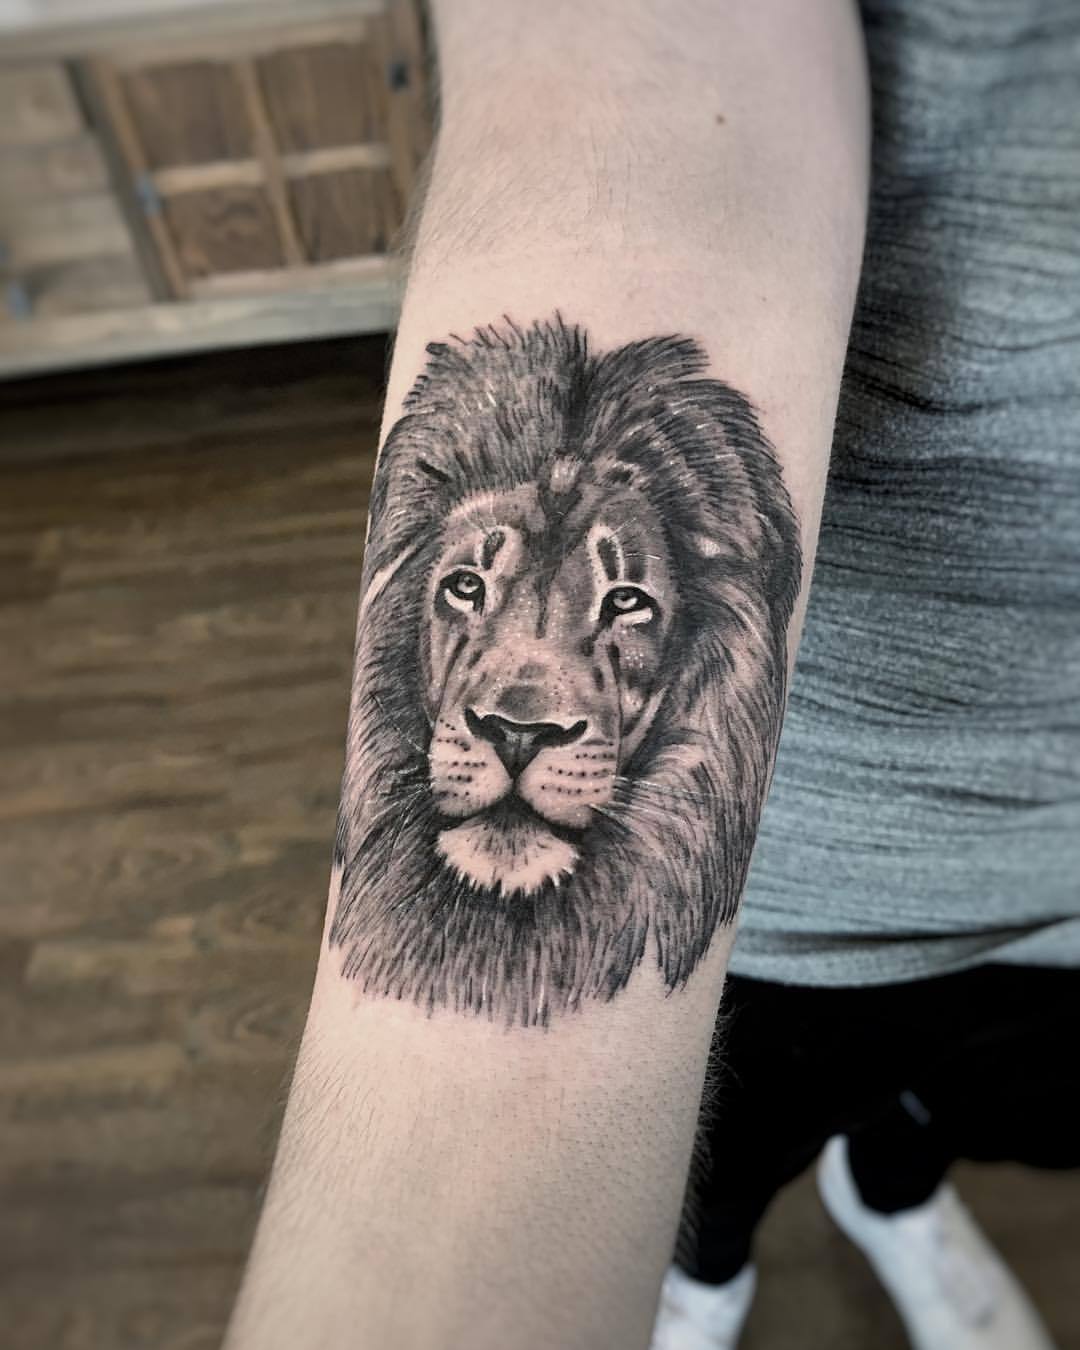 My Tattoo Work • Nice little lion on the forearm for Josh's first...